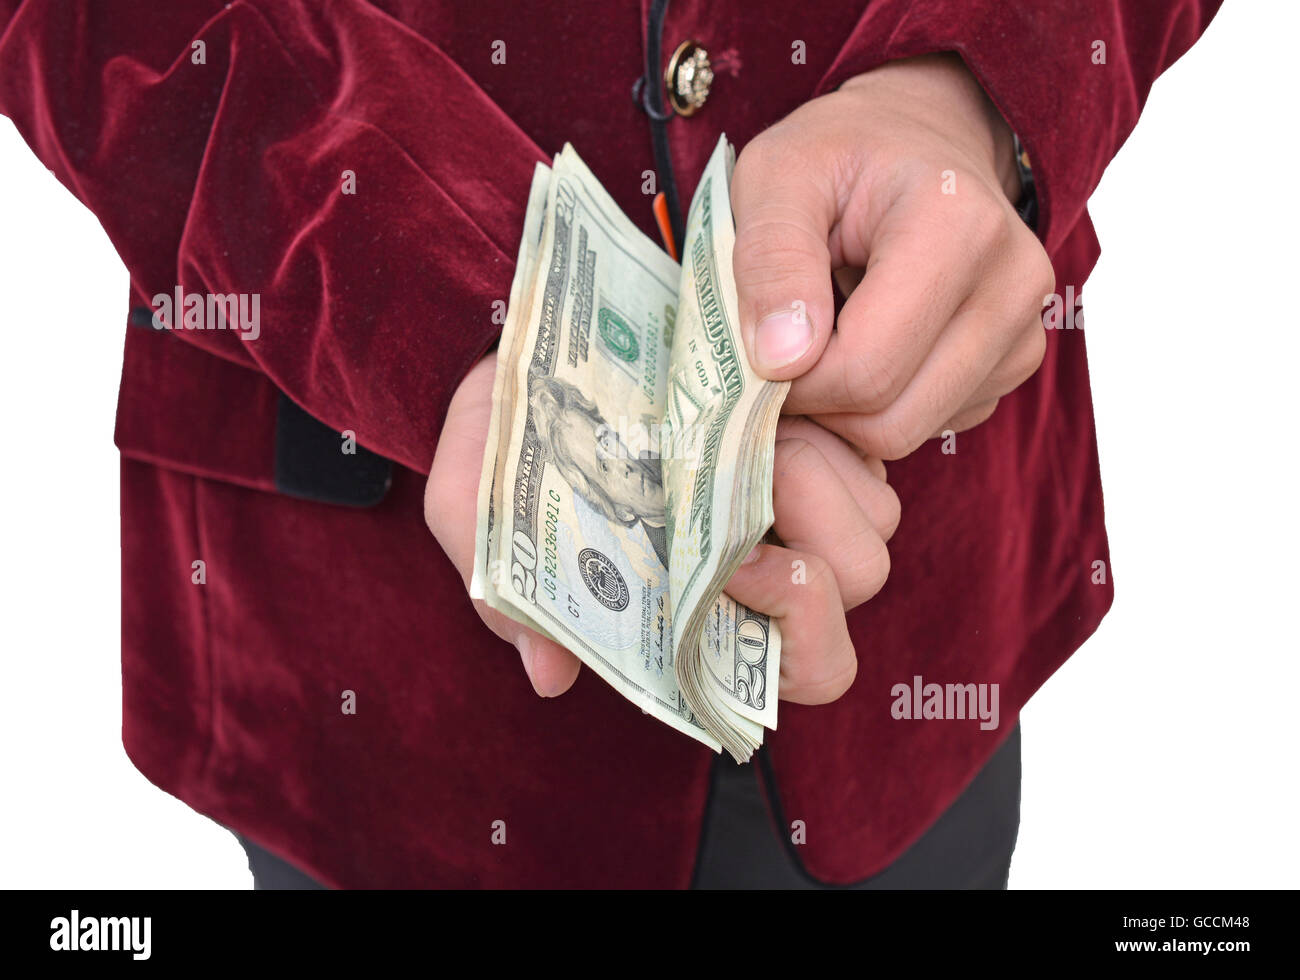 Professional contain the currency notes. Stock Photo